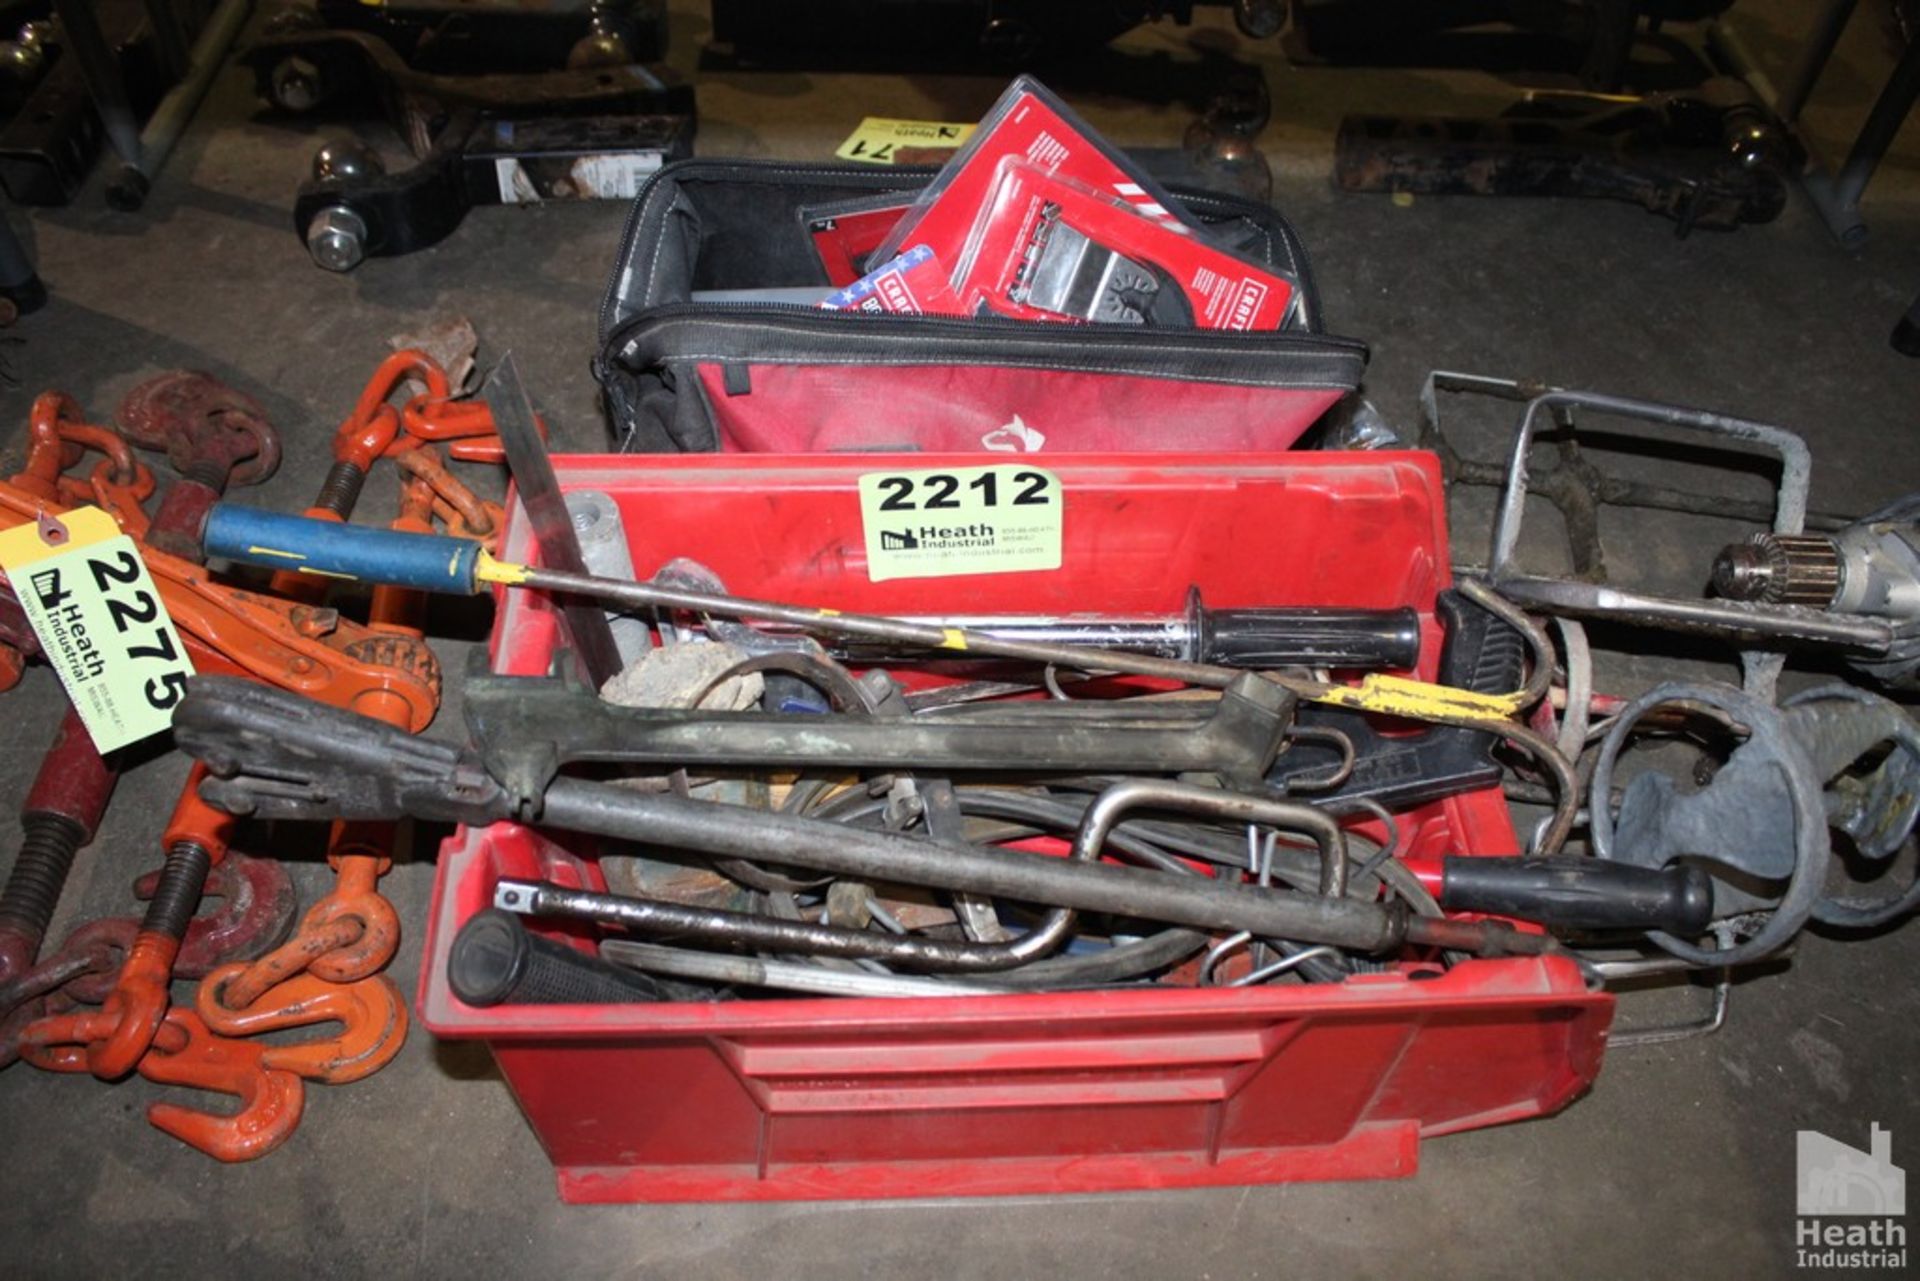 LARGE QTY OF TOOLS, SAWS, OIL FILTER WRENCHES, HOOKS AND SANDING DISCS